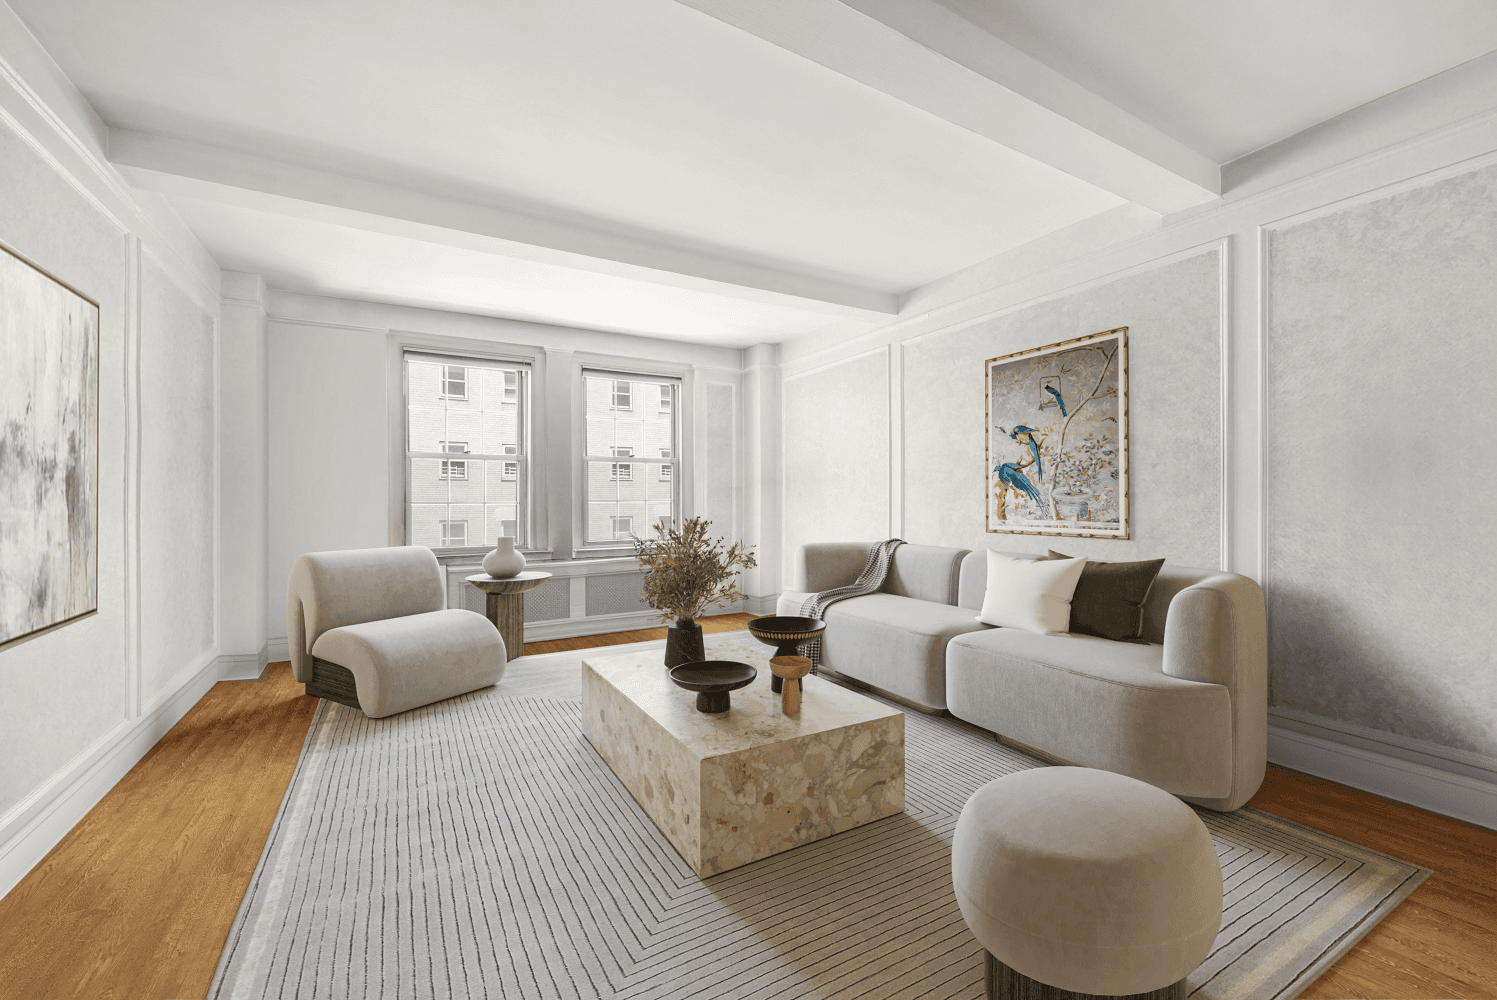 Experience the Charm of Murray Hill LivingDiscover this delightful 1 bedroom prewar co op nestled in the heart of Murray Hill on Park Avenue.